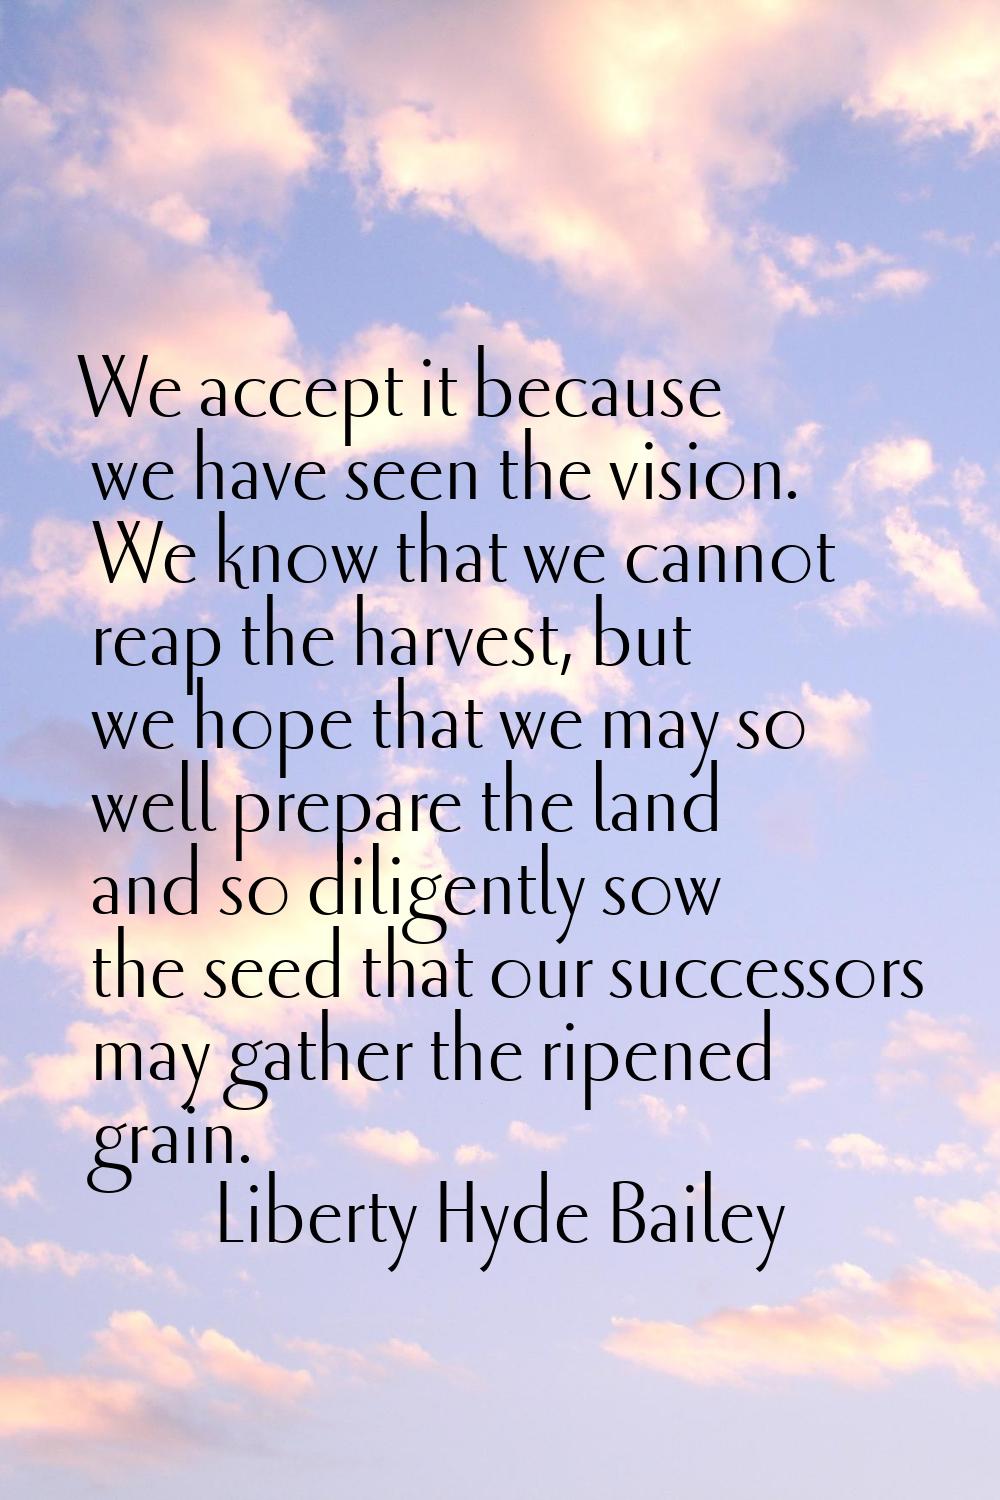 We accept it because we have seen the vision. We know that we cannot reap the harvest, but we hope 